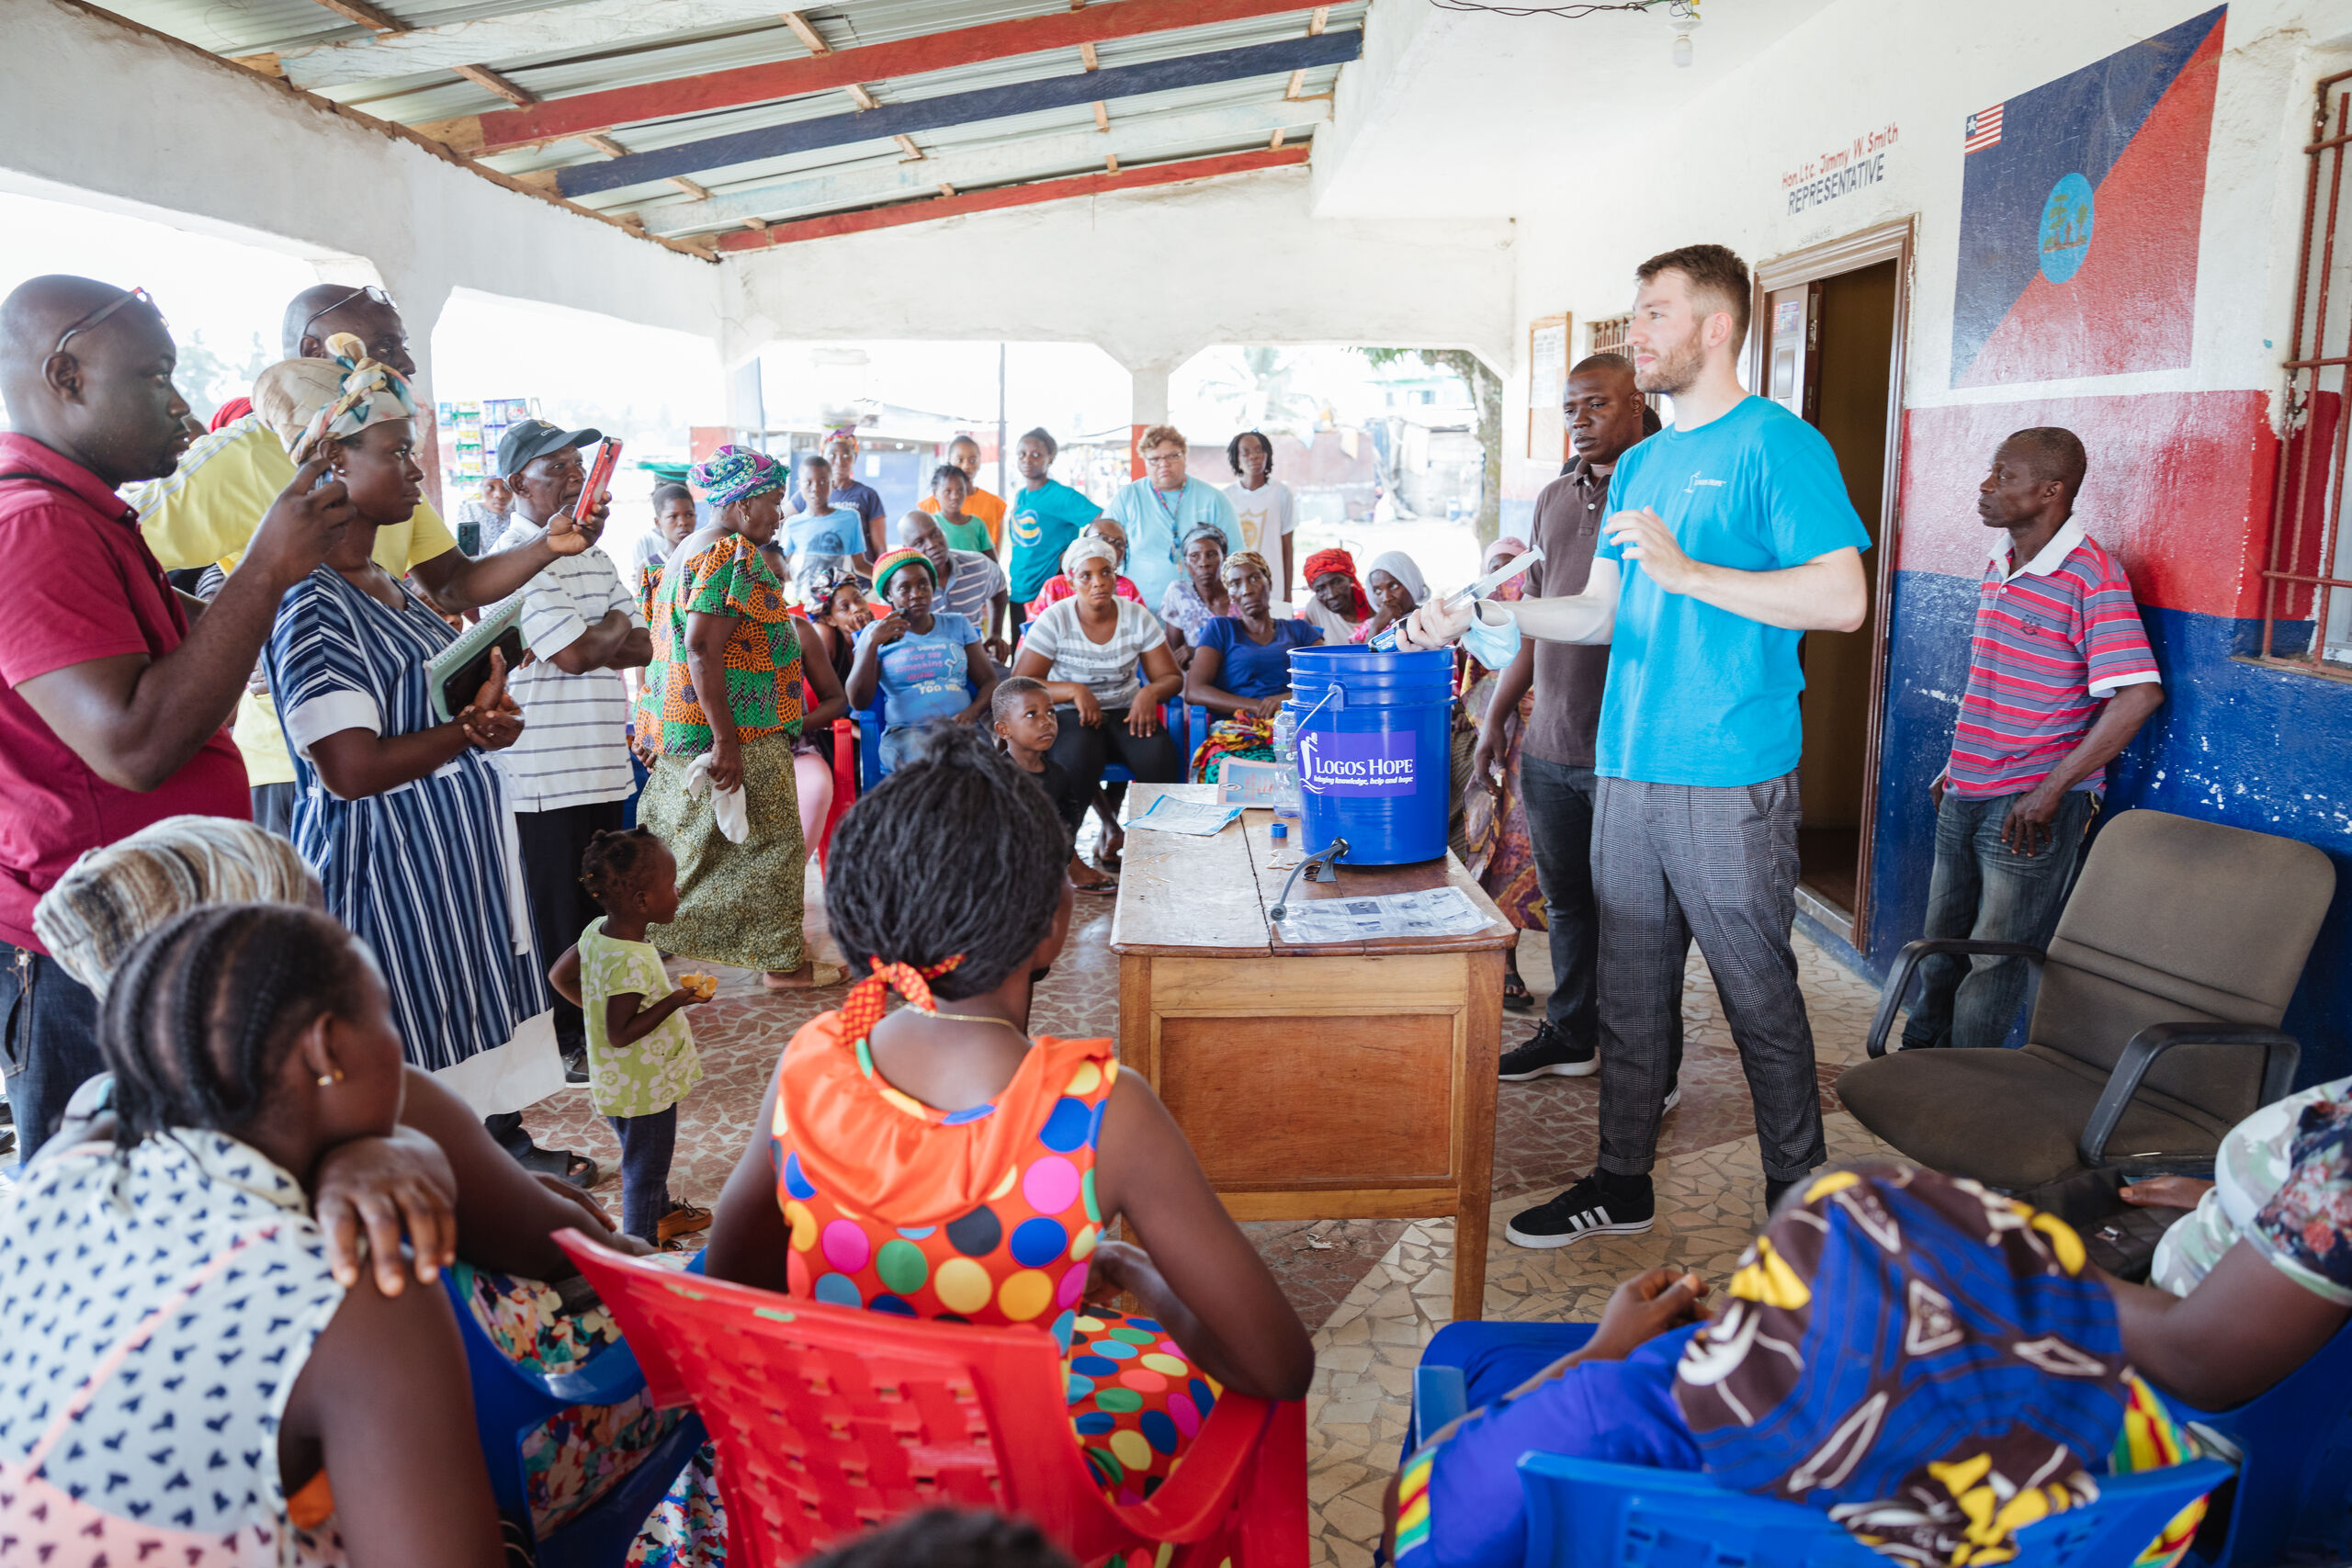 Monrovia, Liberia :: Jan Streitenberger (Germany) explains how to use the water purifiers donated by Logos Hope.